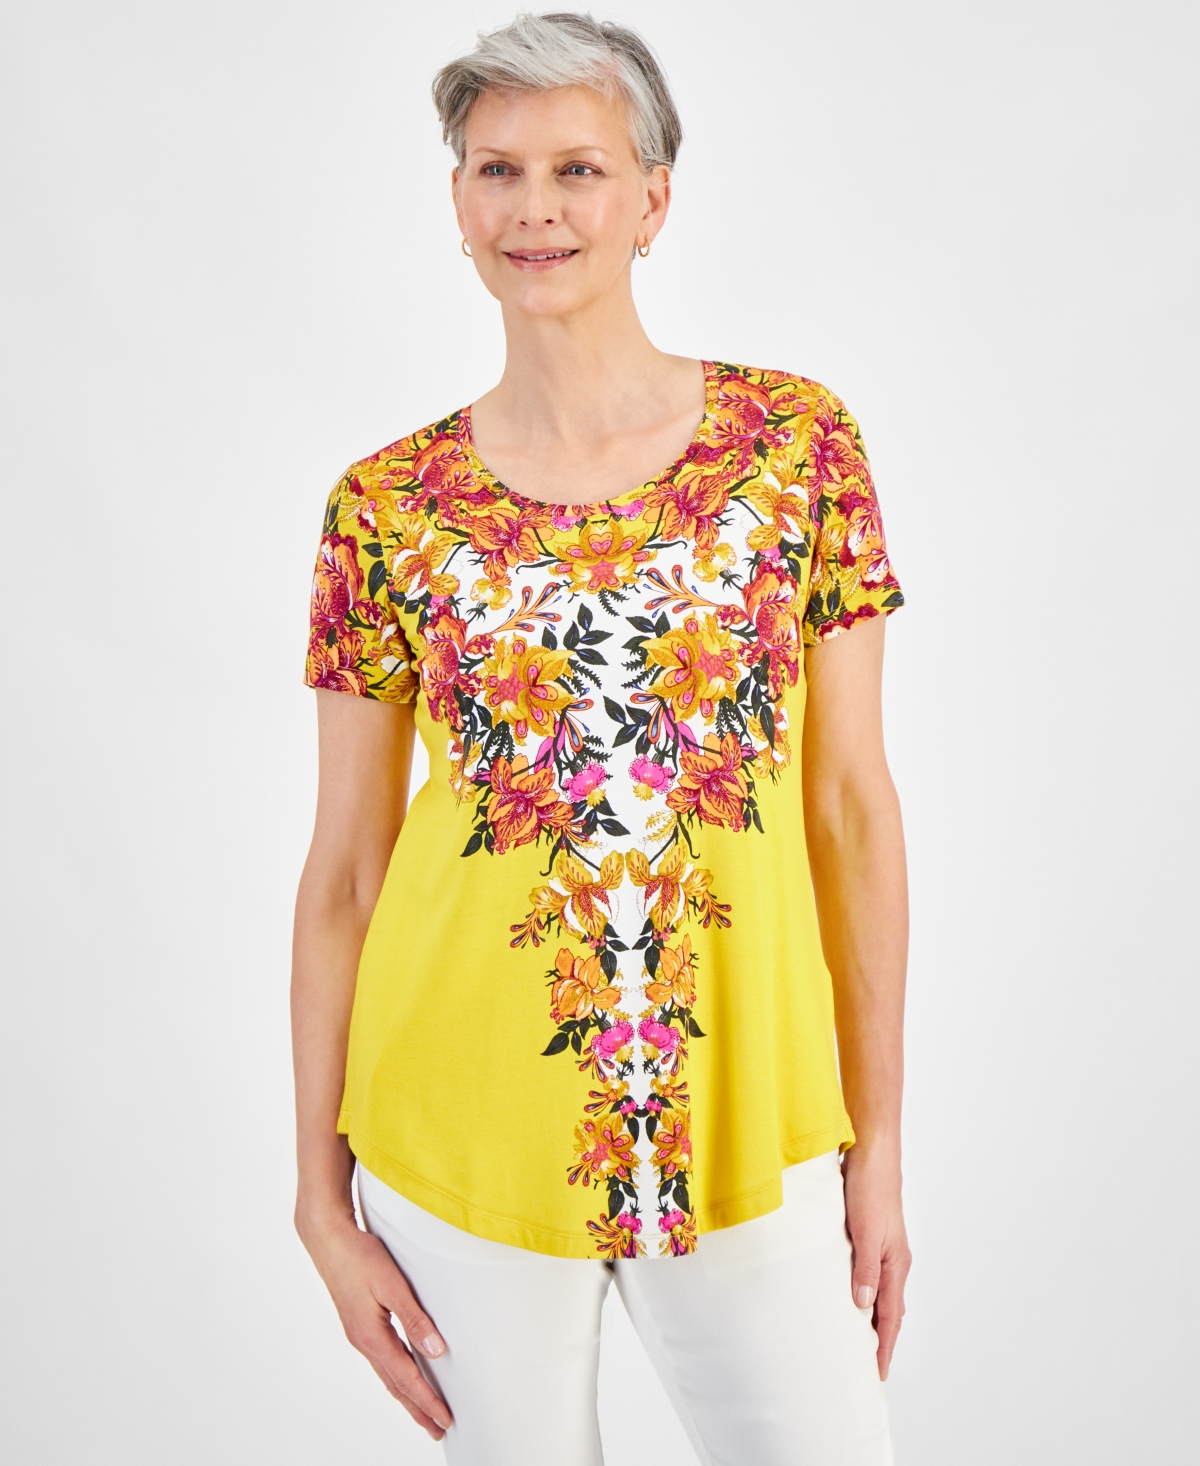 Women's Scoop-Neck Short-Sleeve Printed Knit Top, Created for Macy's - Lemon Wedge Combo